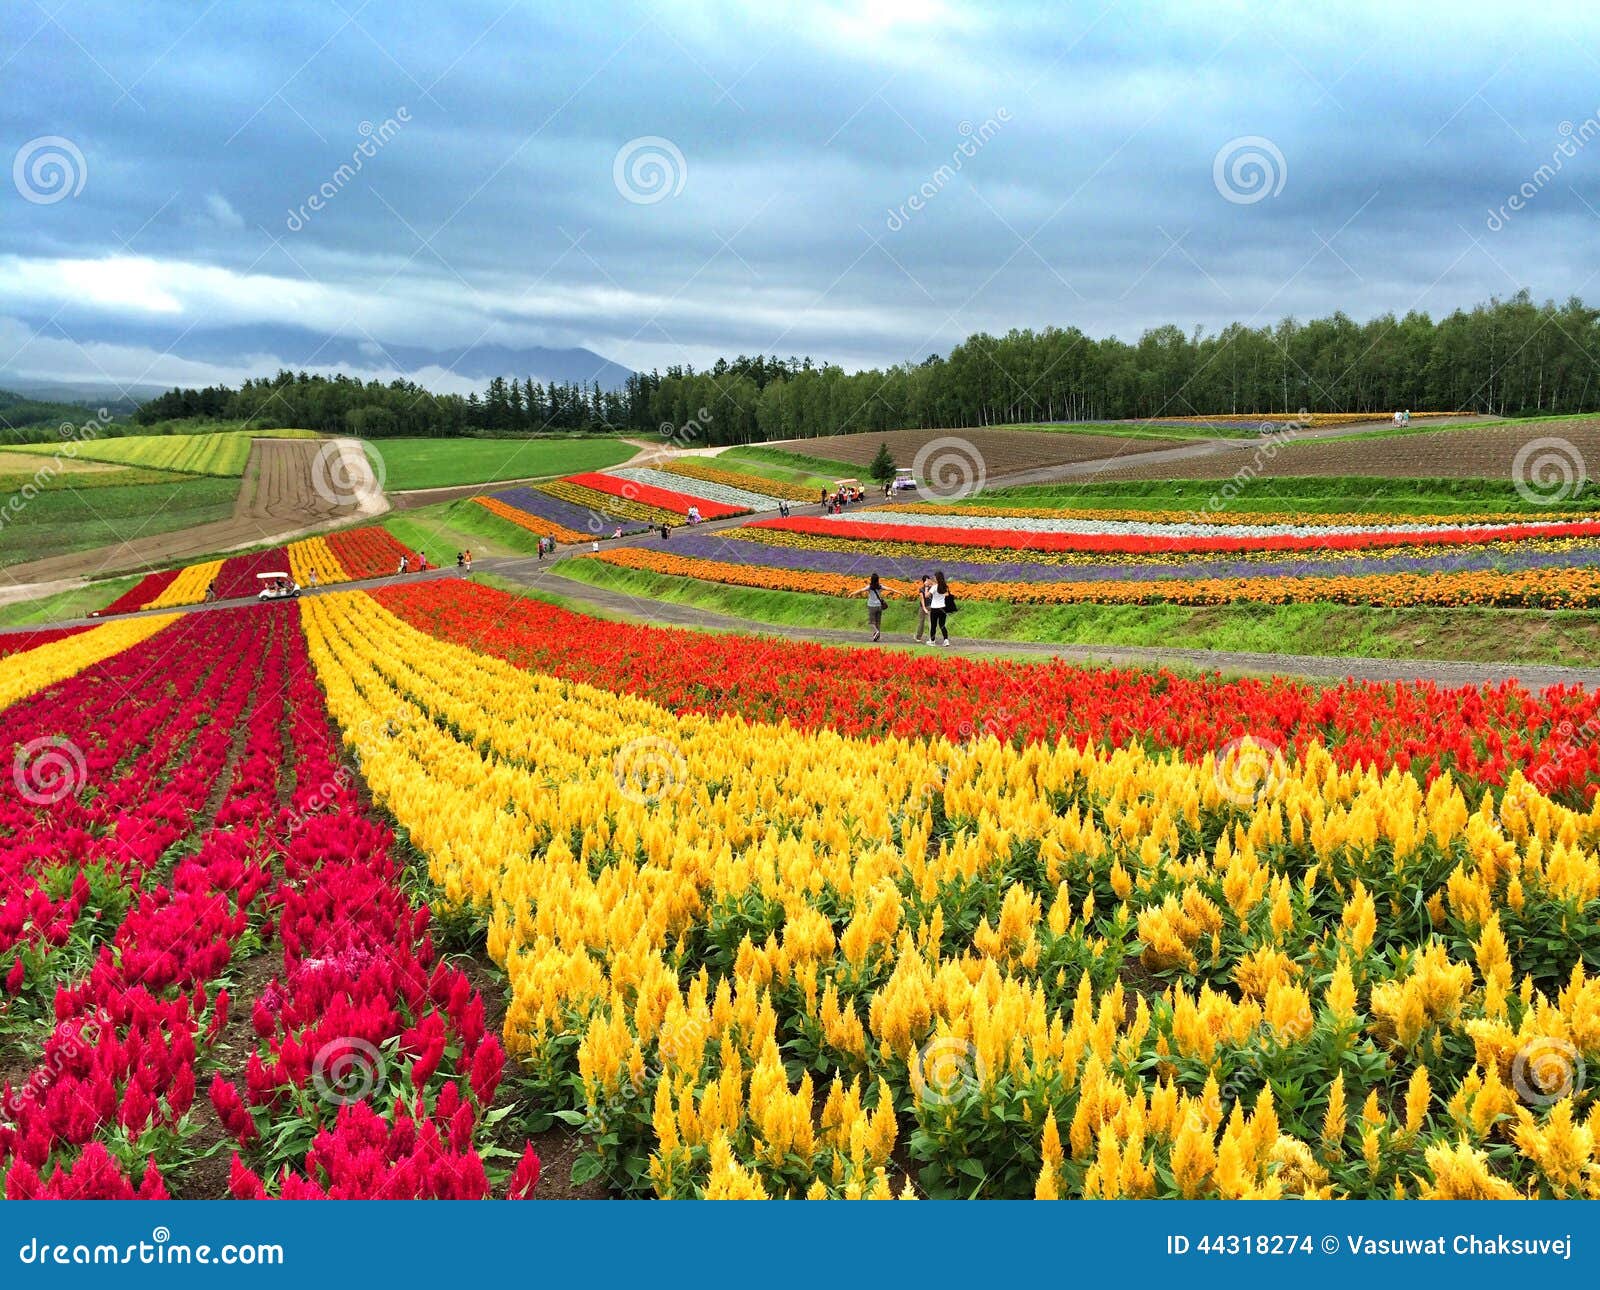 flowers garden in furano stock photo. image of natural - 44318274